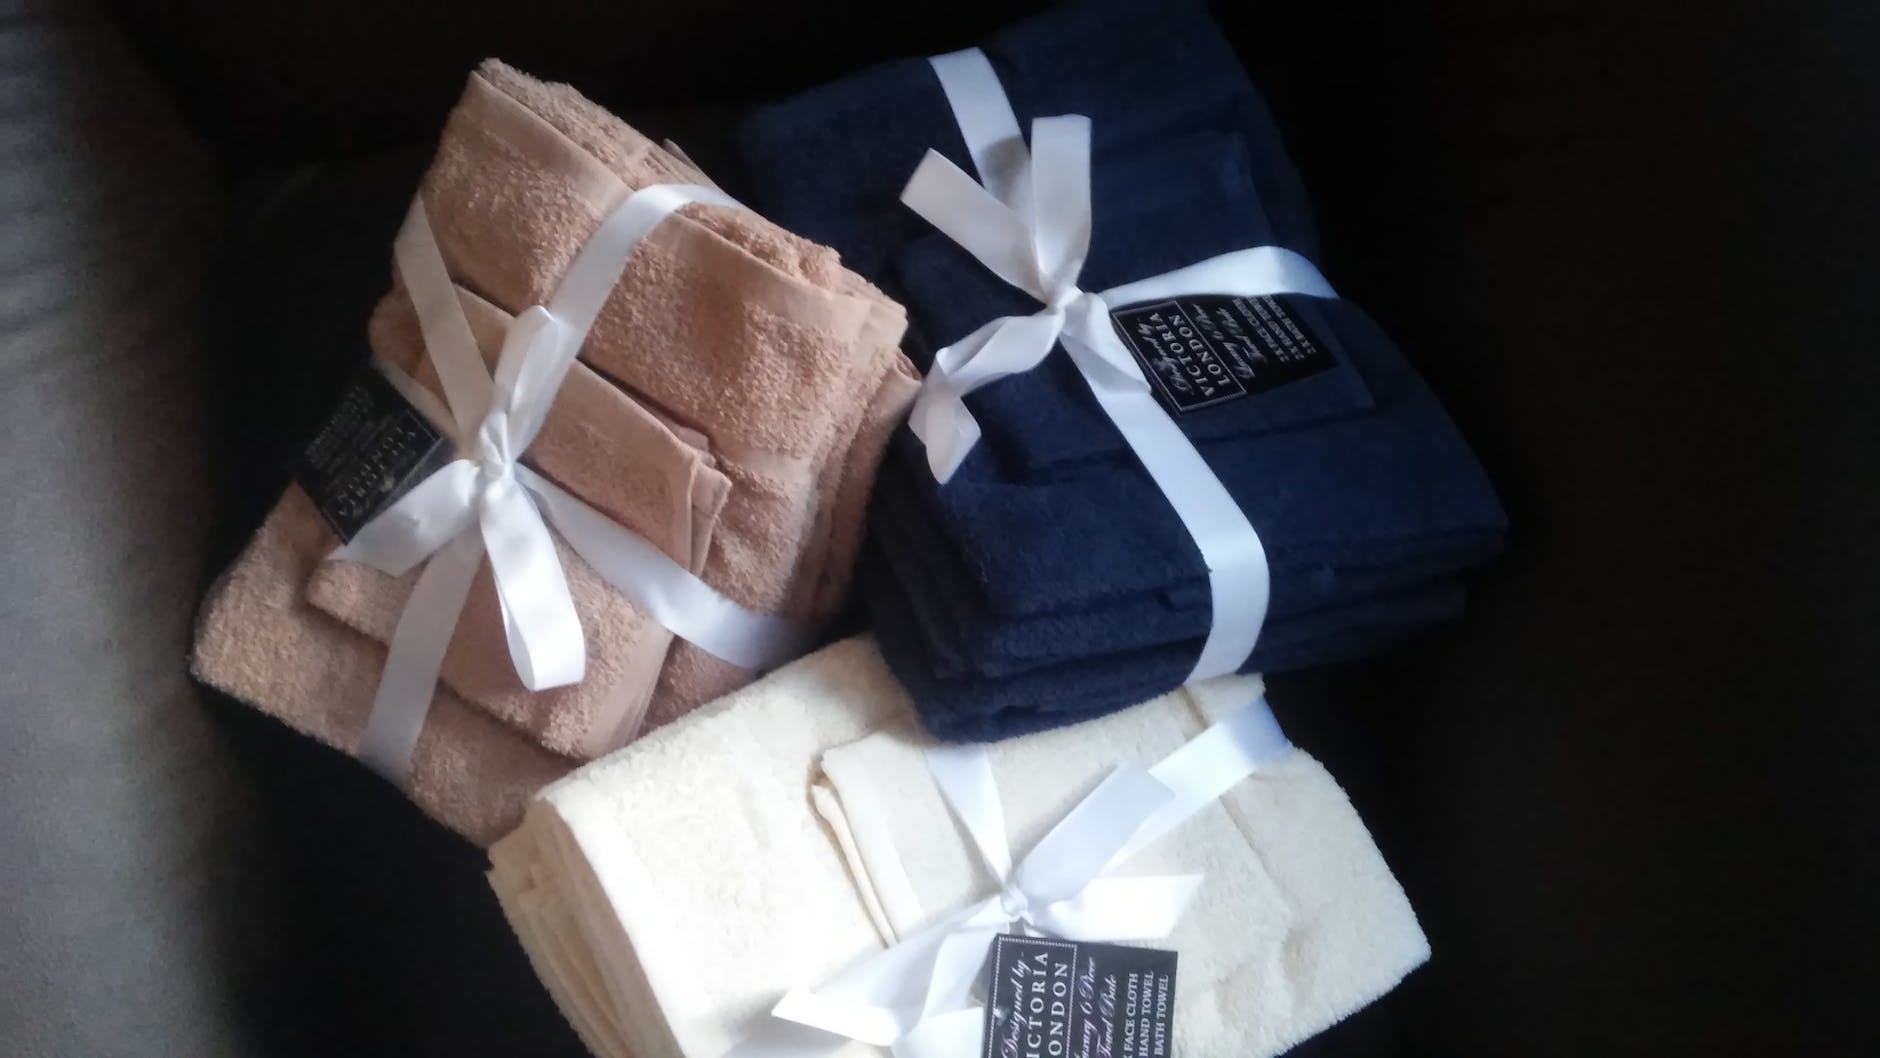 Towel gifts